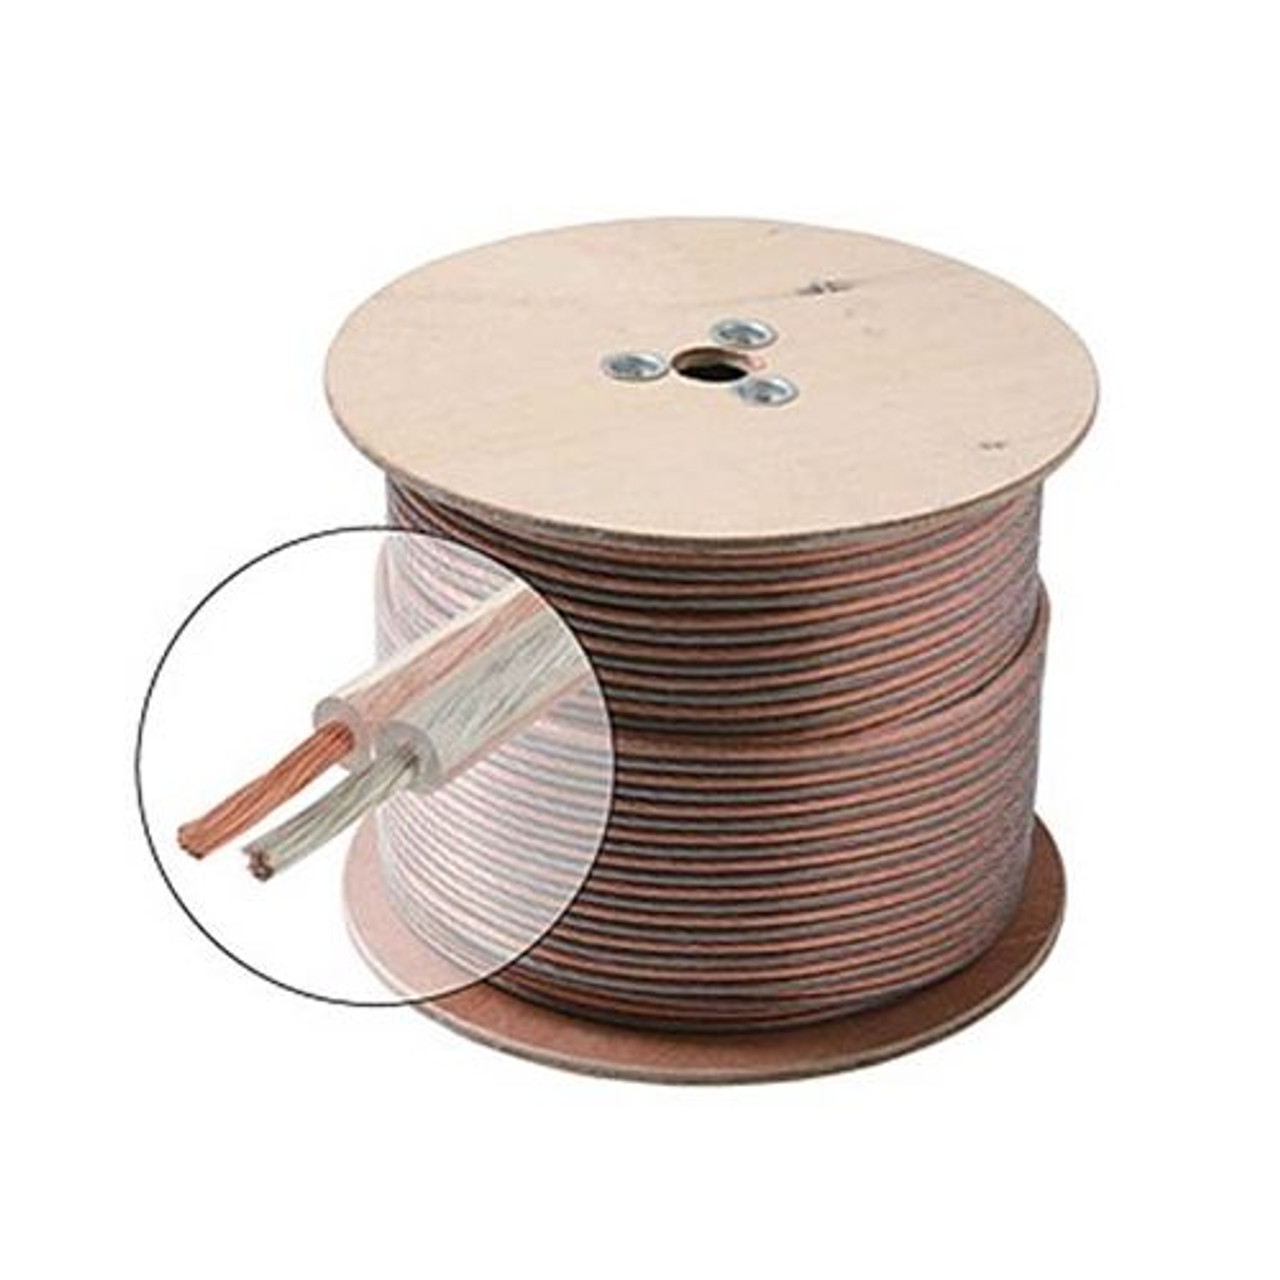 Eagle 100 FT 18 AWG GA Speaker Cable 2 Conductor Oxygen Free Clear Stranded Flexible Copper Polarized 2-Wire Bulk 18 Gauge Speaker Cable, 100 FT